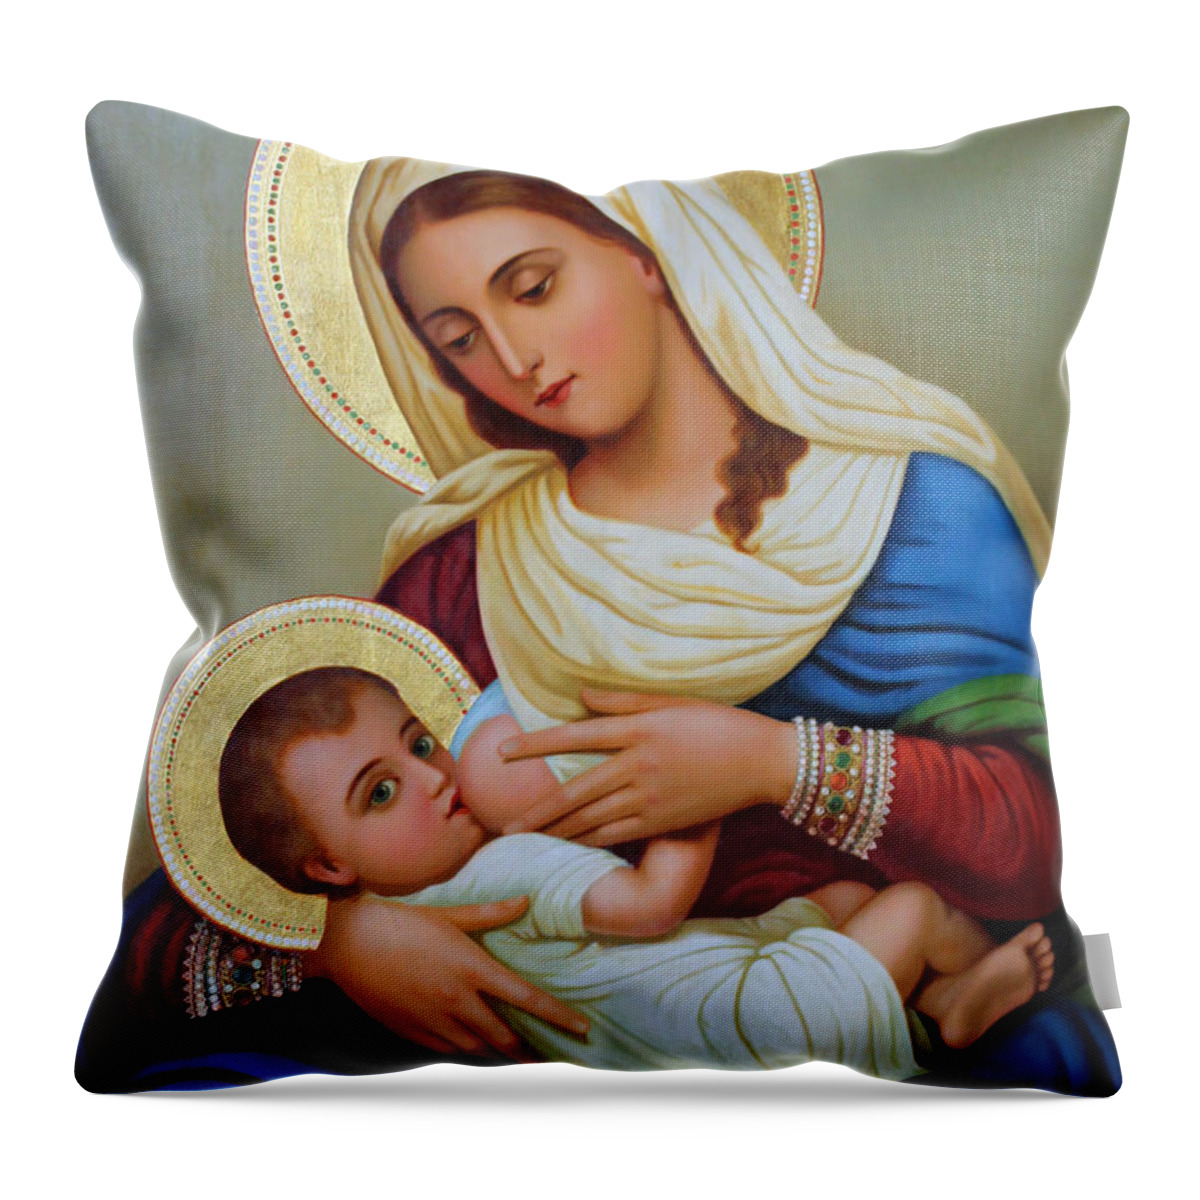 Milk Throw Pillow featuring the painting Milk Grotto Artwork by Munir Alawi